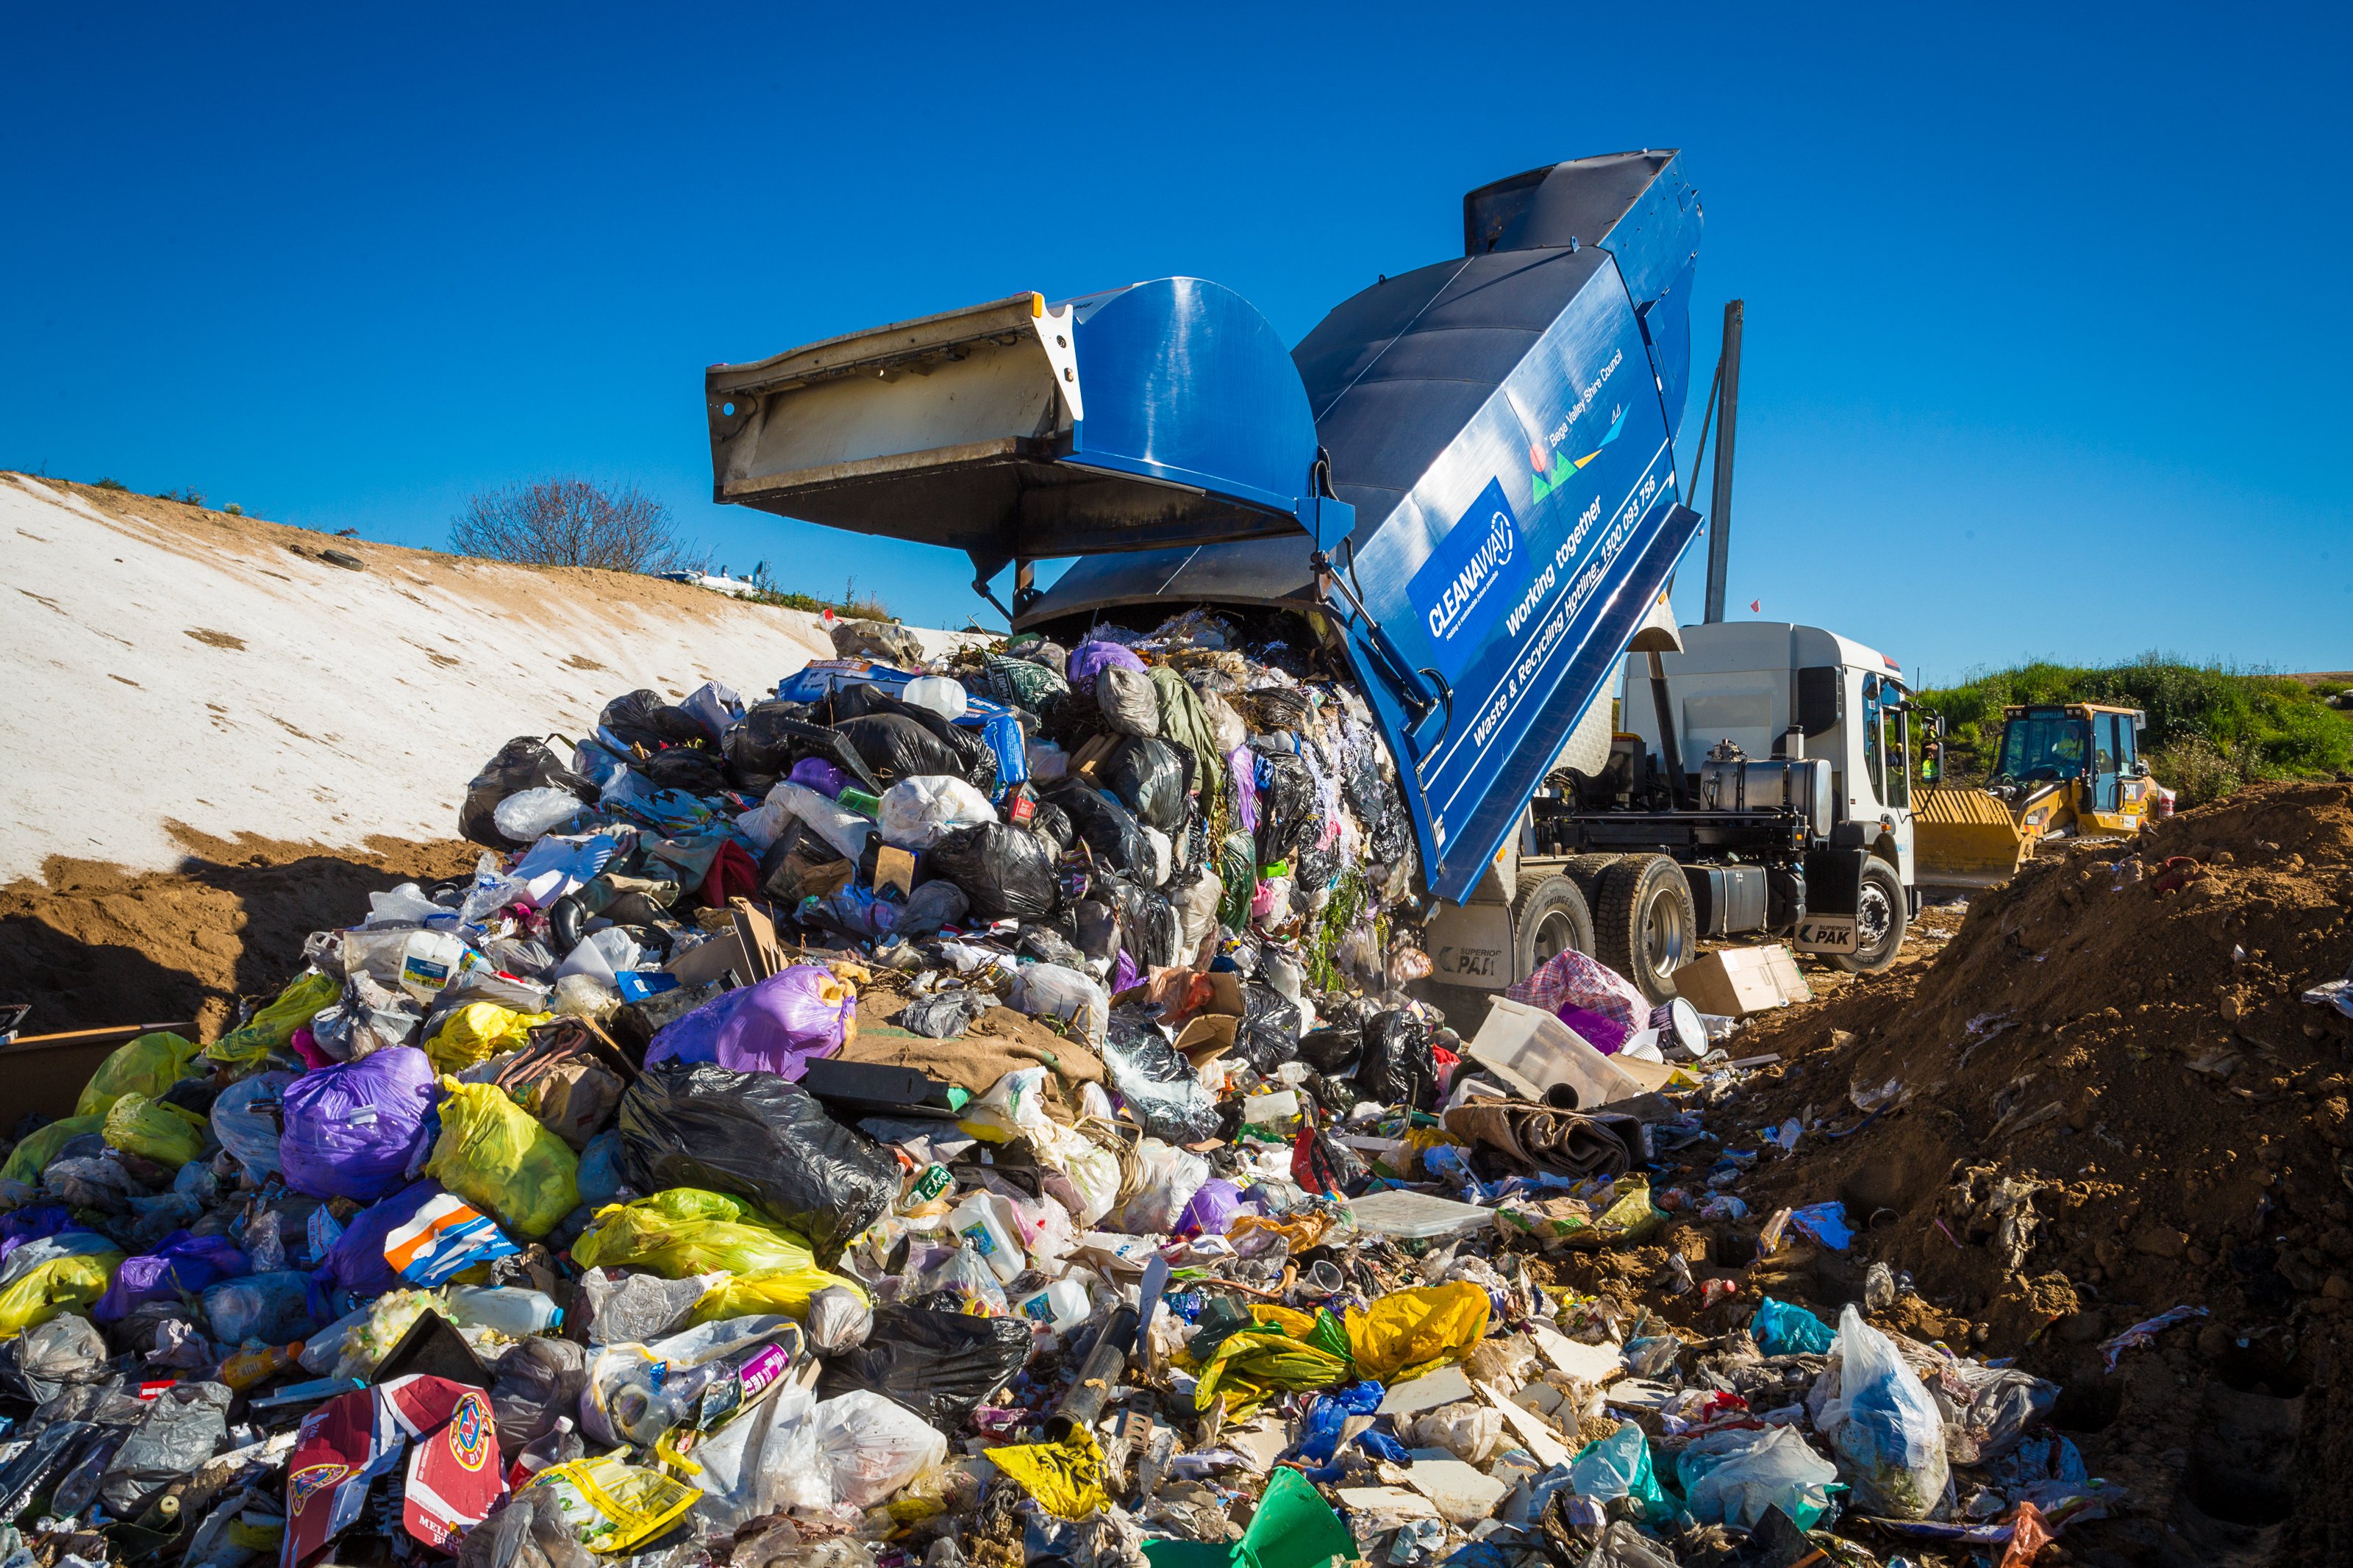 Christmas rubbish reduction tips from Bega Waste manager Joley Vidau